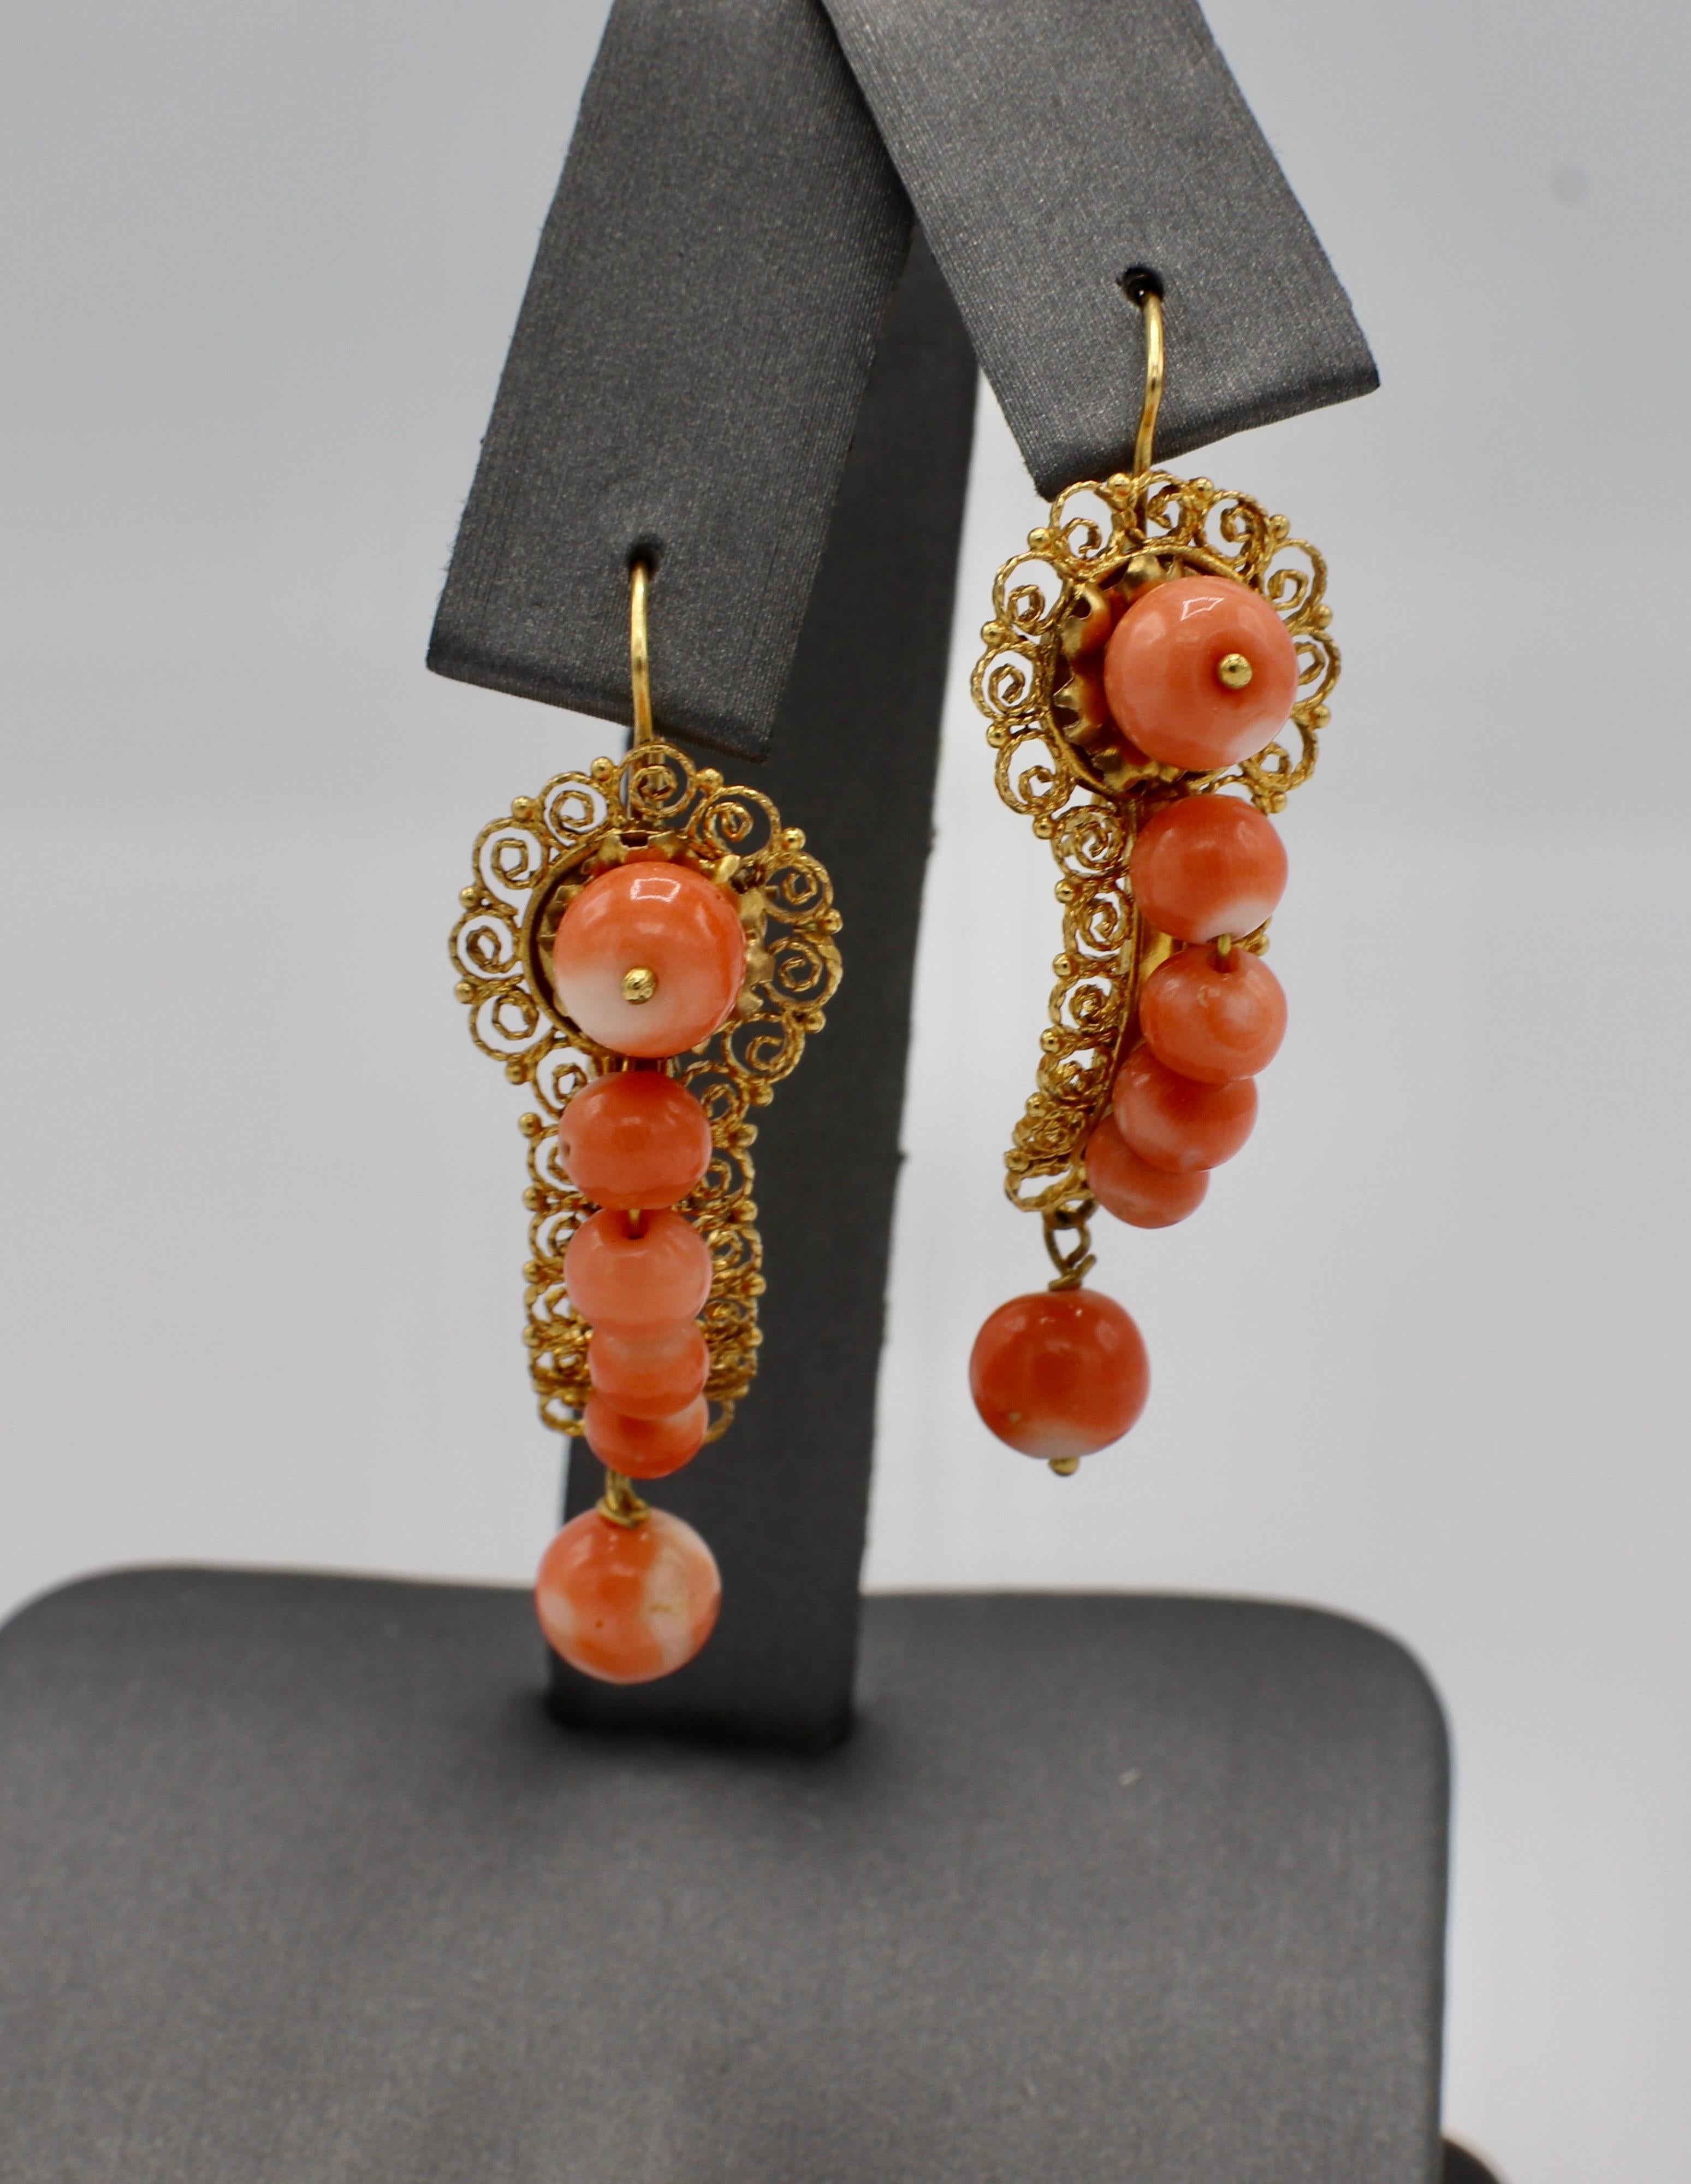 Antique Victorian 14K Yellow Gold Coral Bead Dangle Drop Earrings 
Metal: 14k yellow gold
Weight: 6.89 grams
Coral: 4.5 - 7MM
Length: 38MM
Width: 14MM
